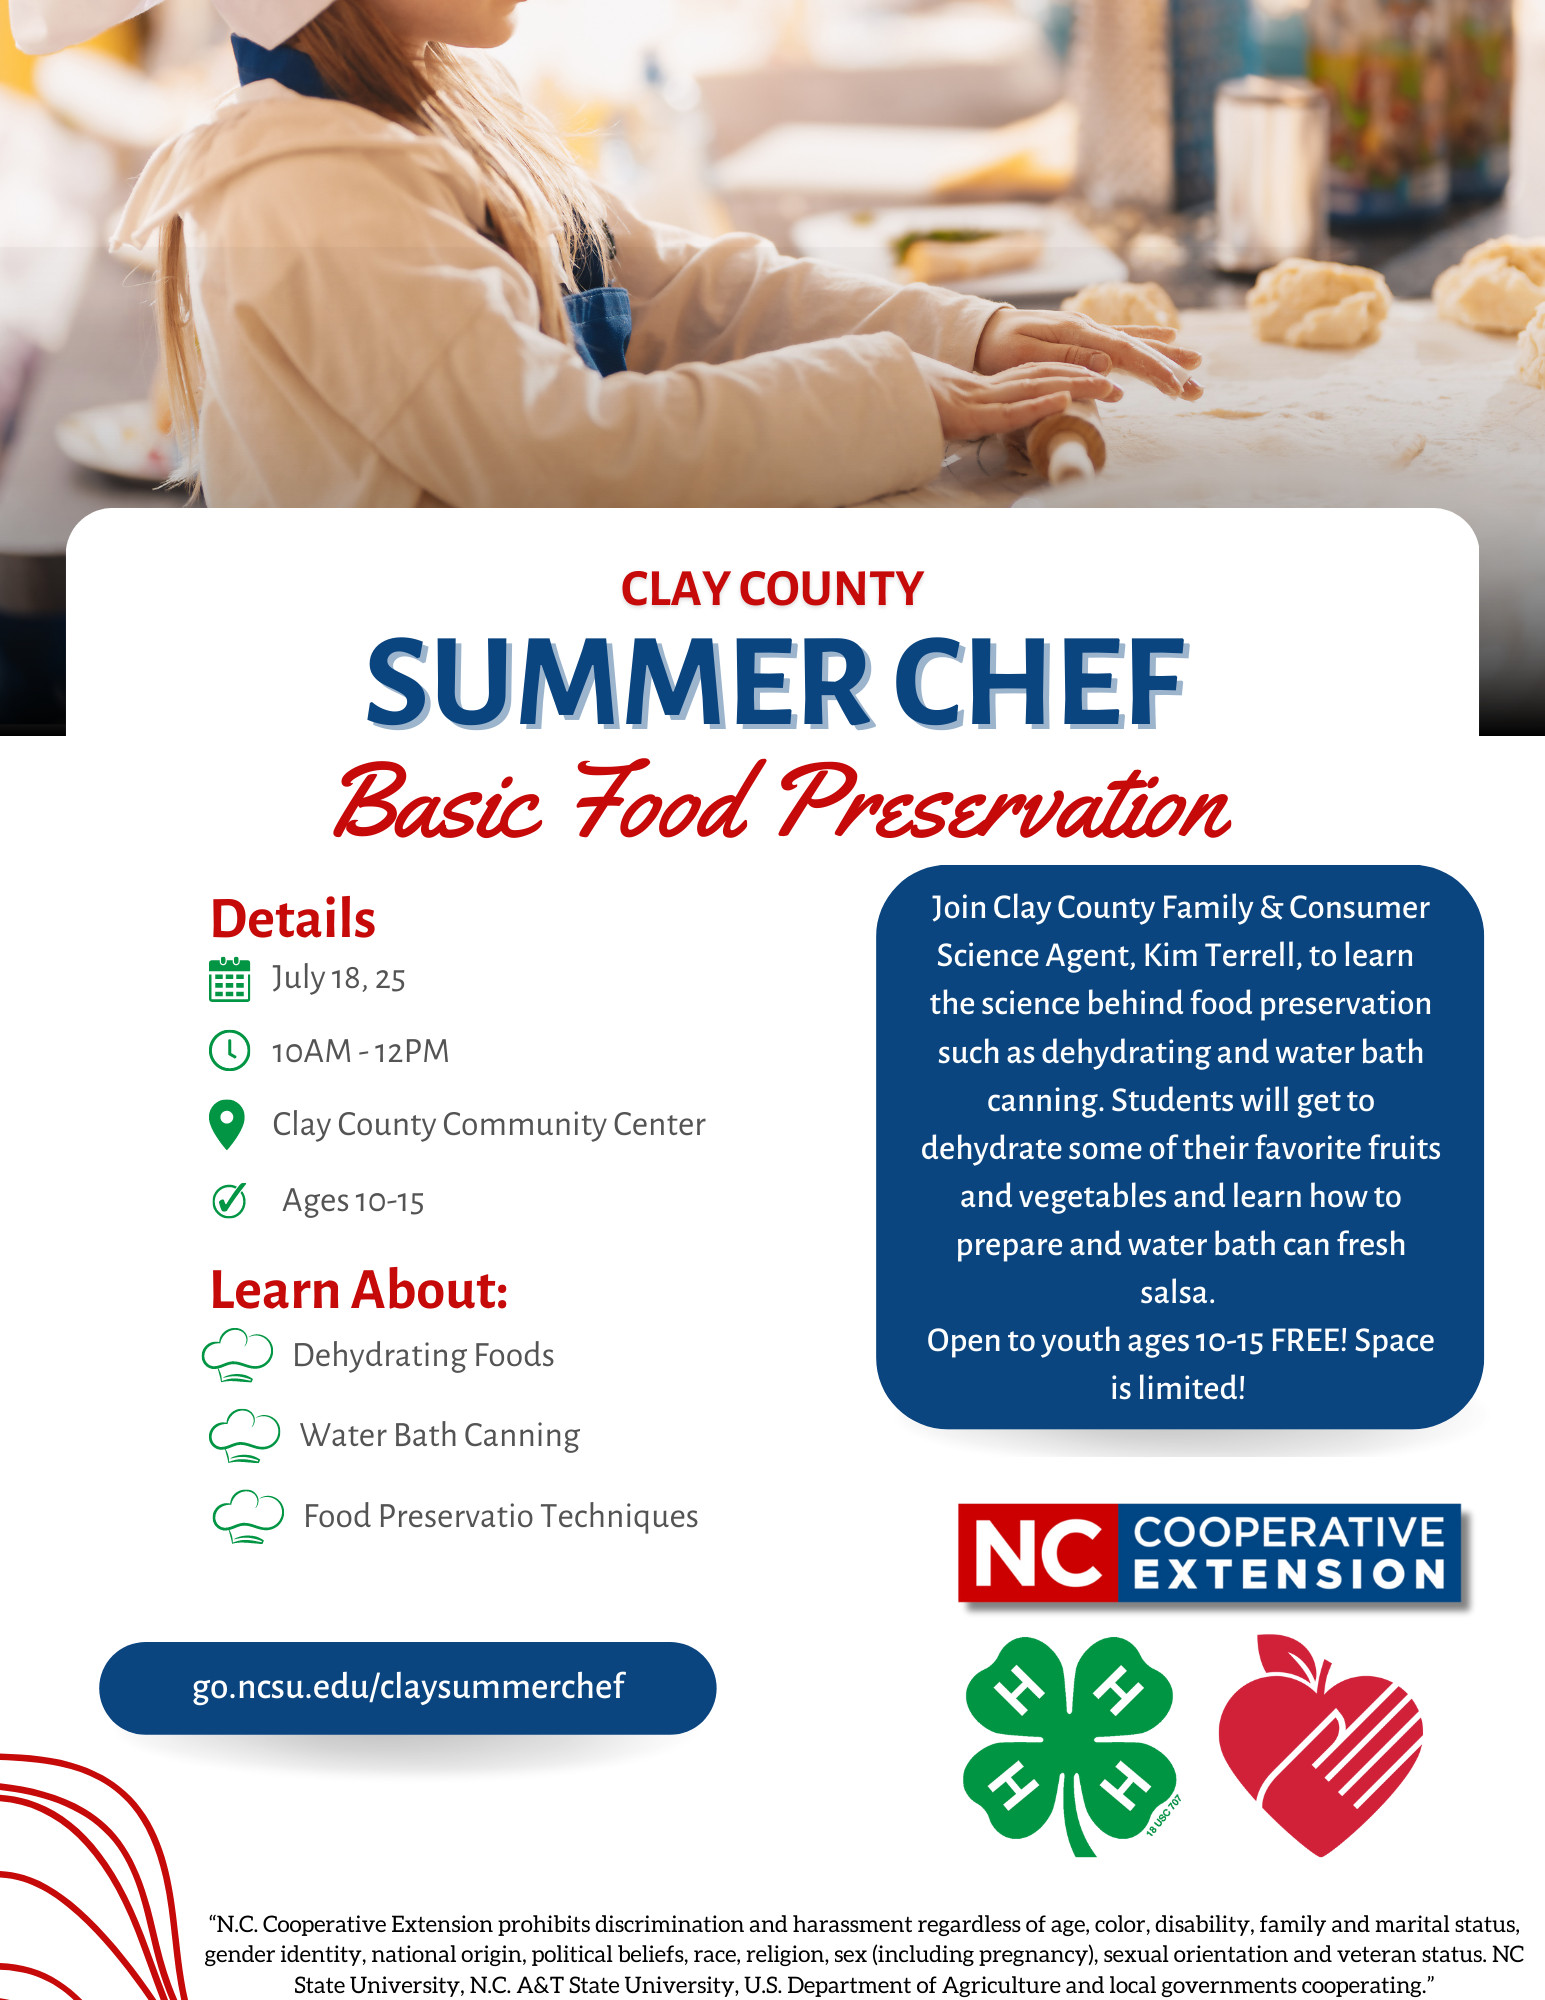 Clay County Summer Chef, Basic Food Preservation